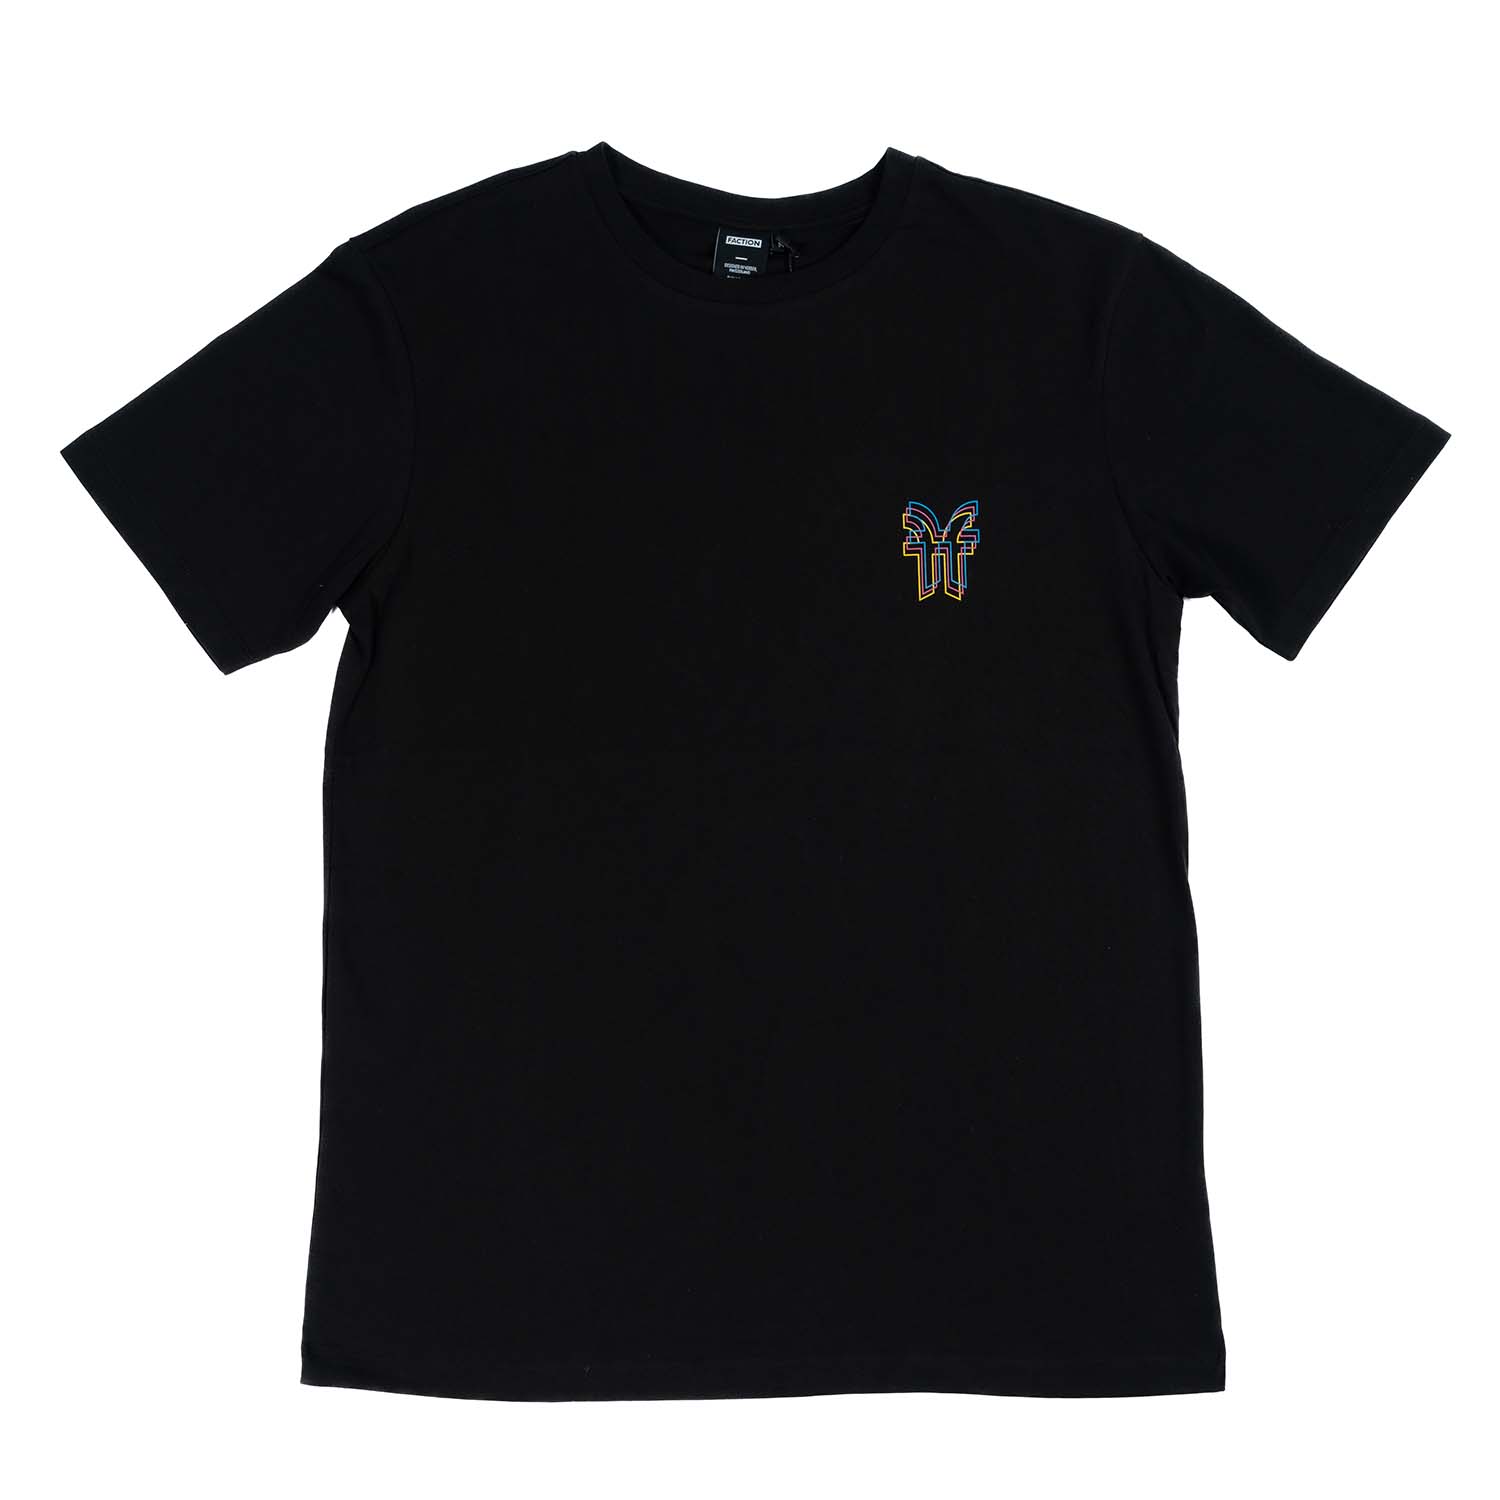 Faction Prodigy Black Tee Flat Lay Front